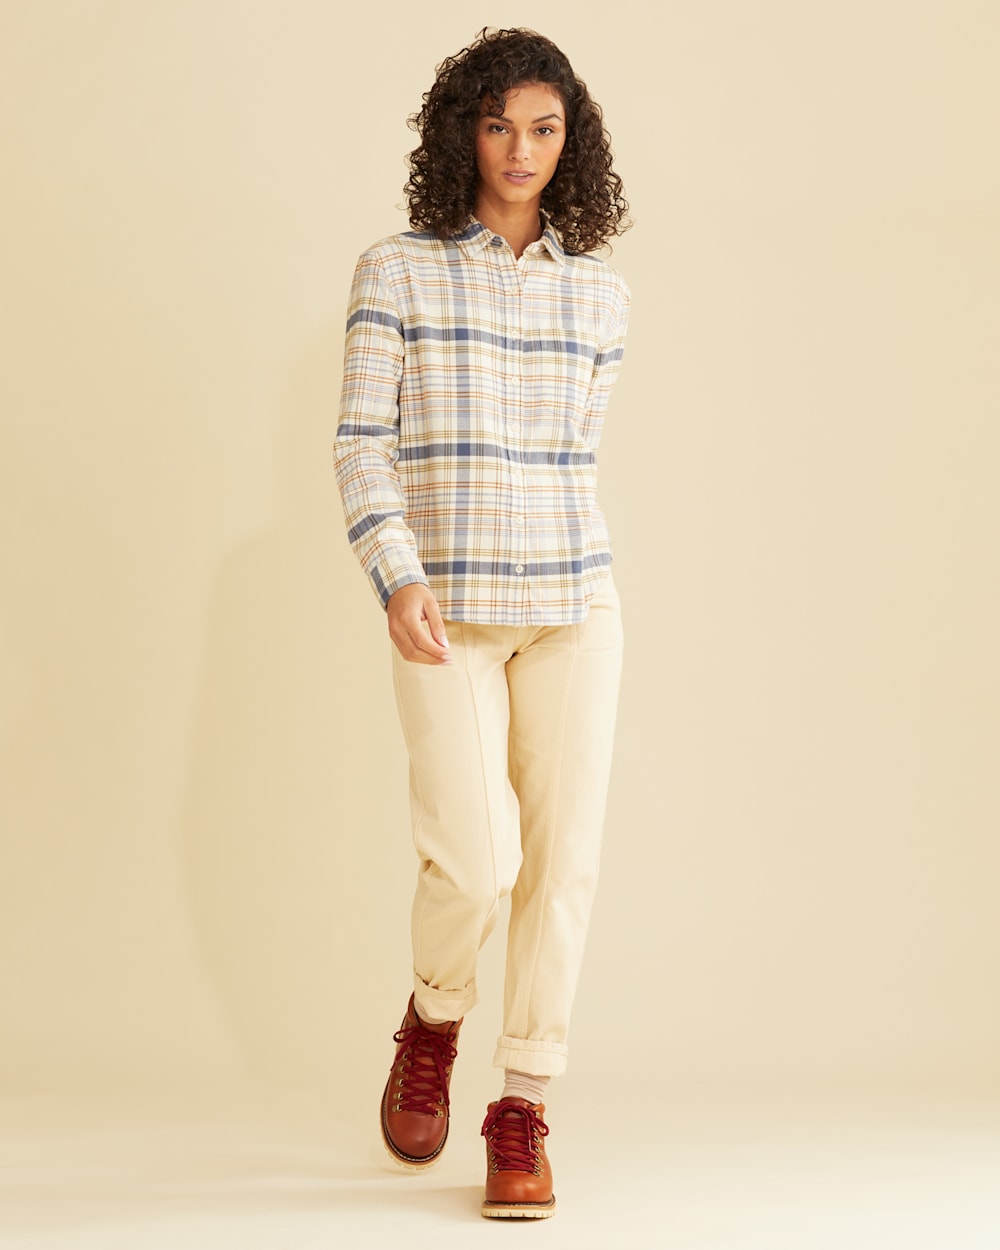 ALTERNATE VIEW OF WOMEN'S BOYFRIEND DOUBLE-BRUSHED FLANNEL SHIRT IN IVORY/INDIGO PLAID image number 5